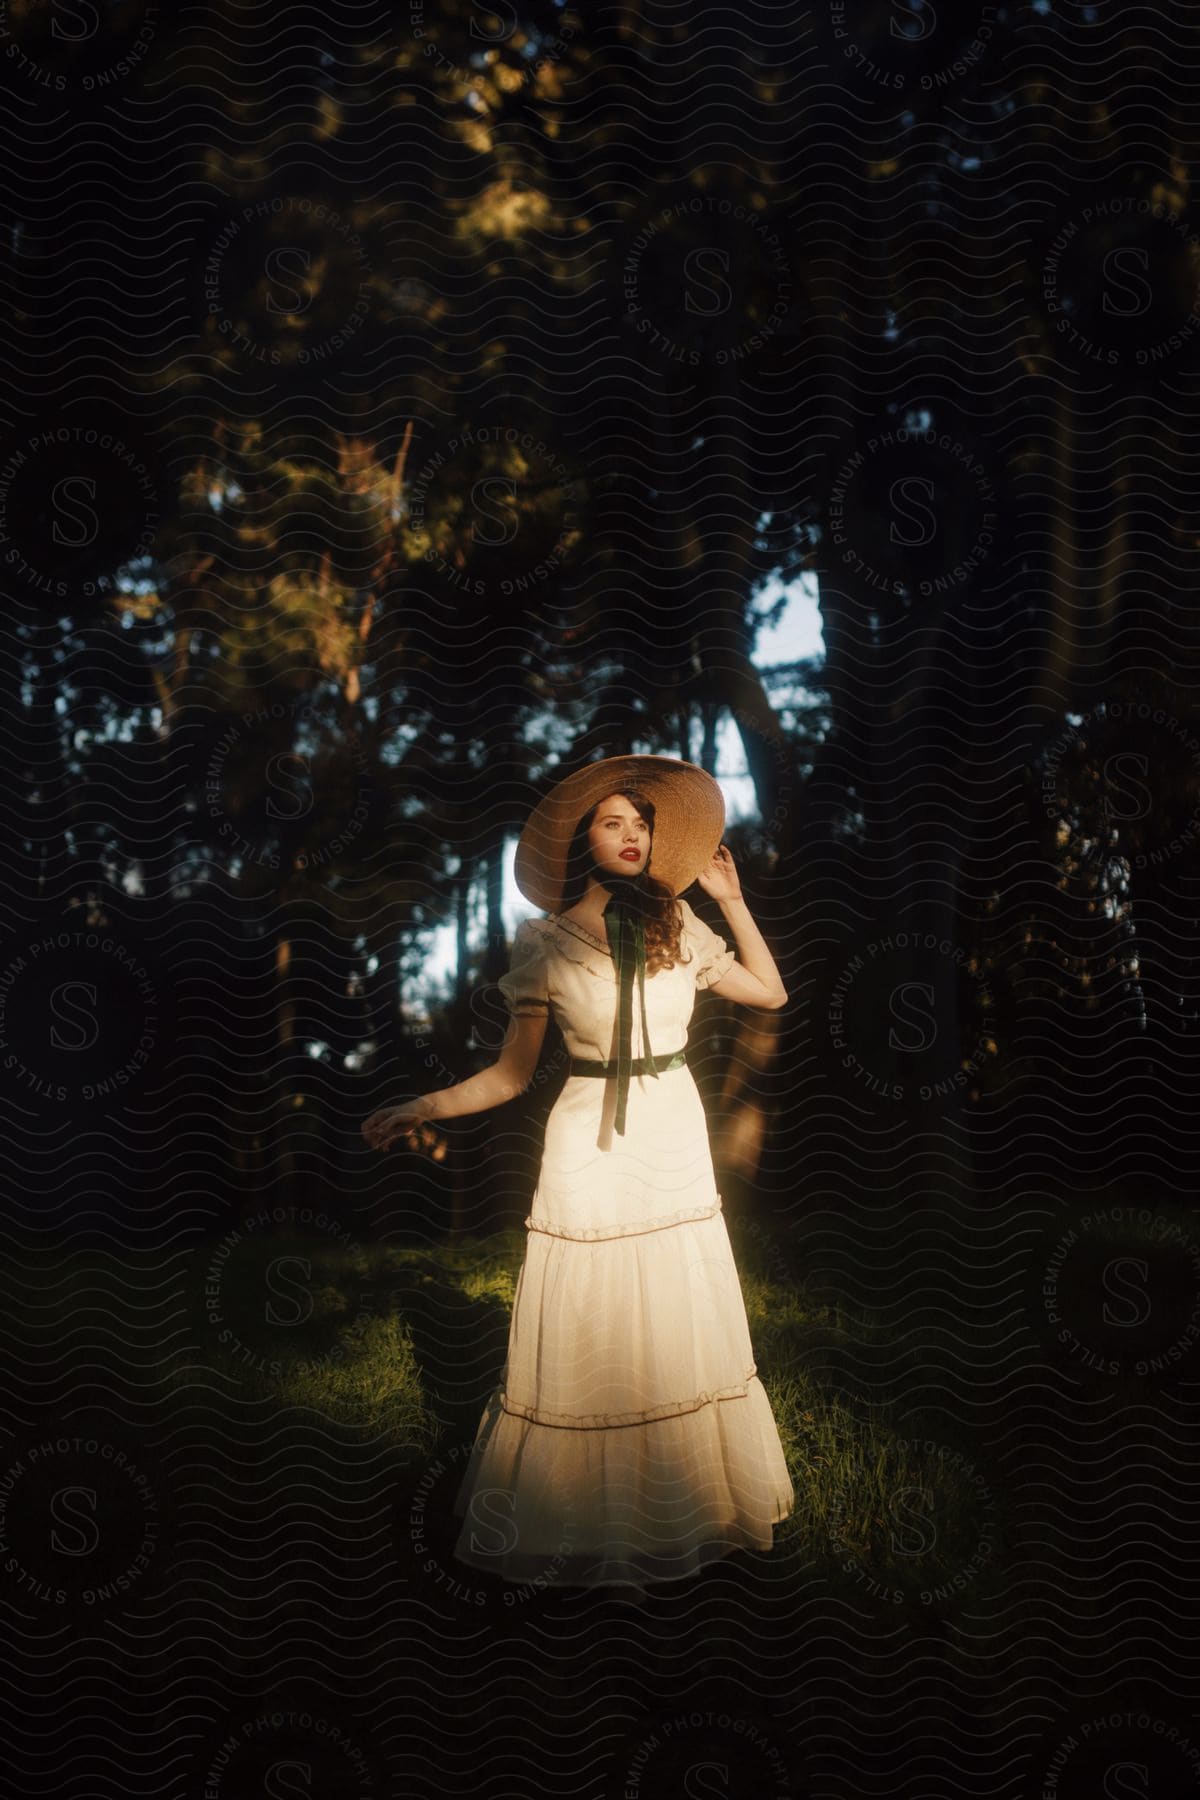 Woman in a long white dress and a sun hat walking in a garden with trees around her and the sun's reflections on her.